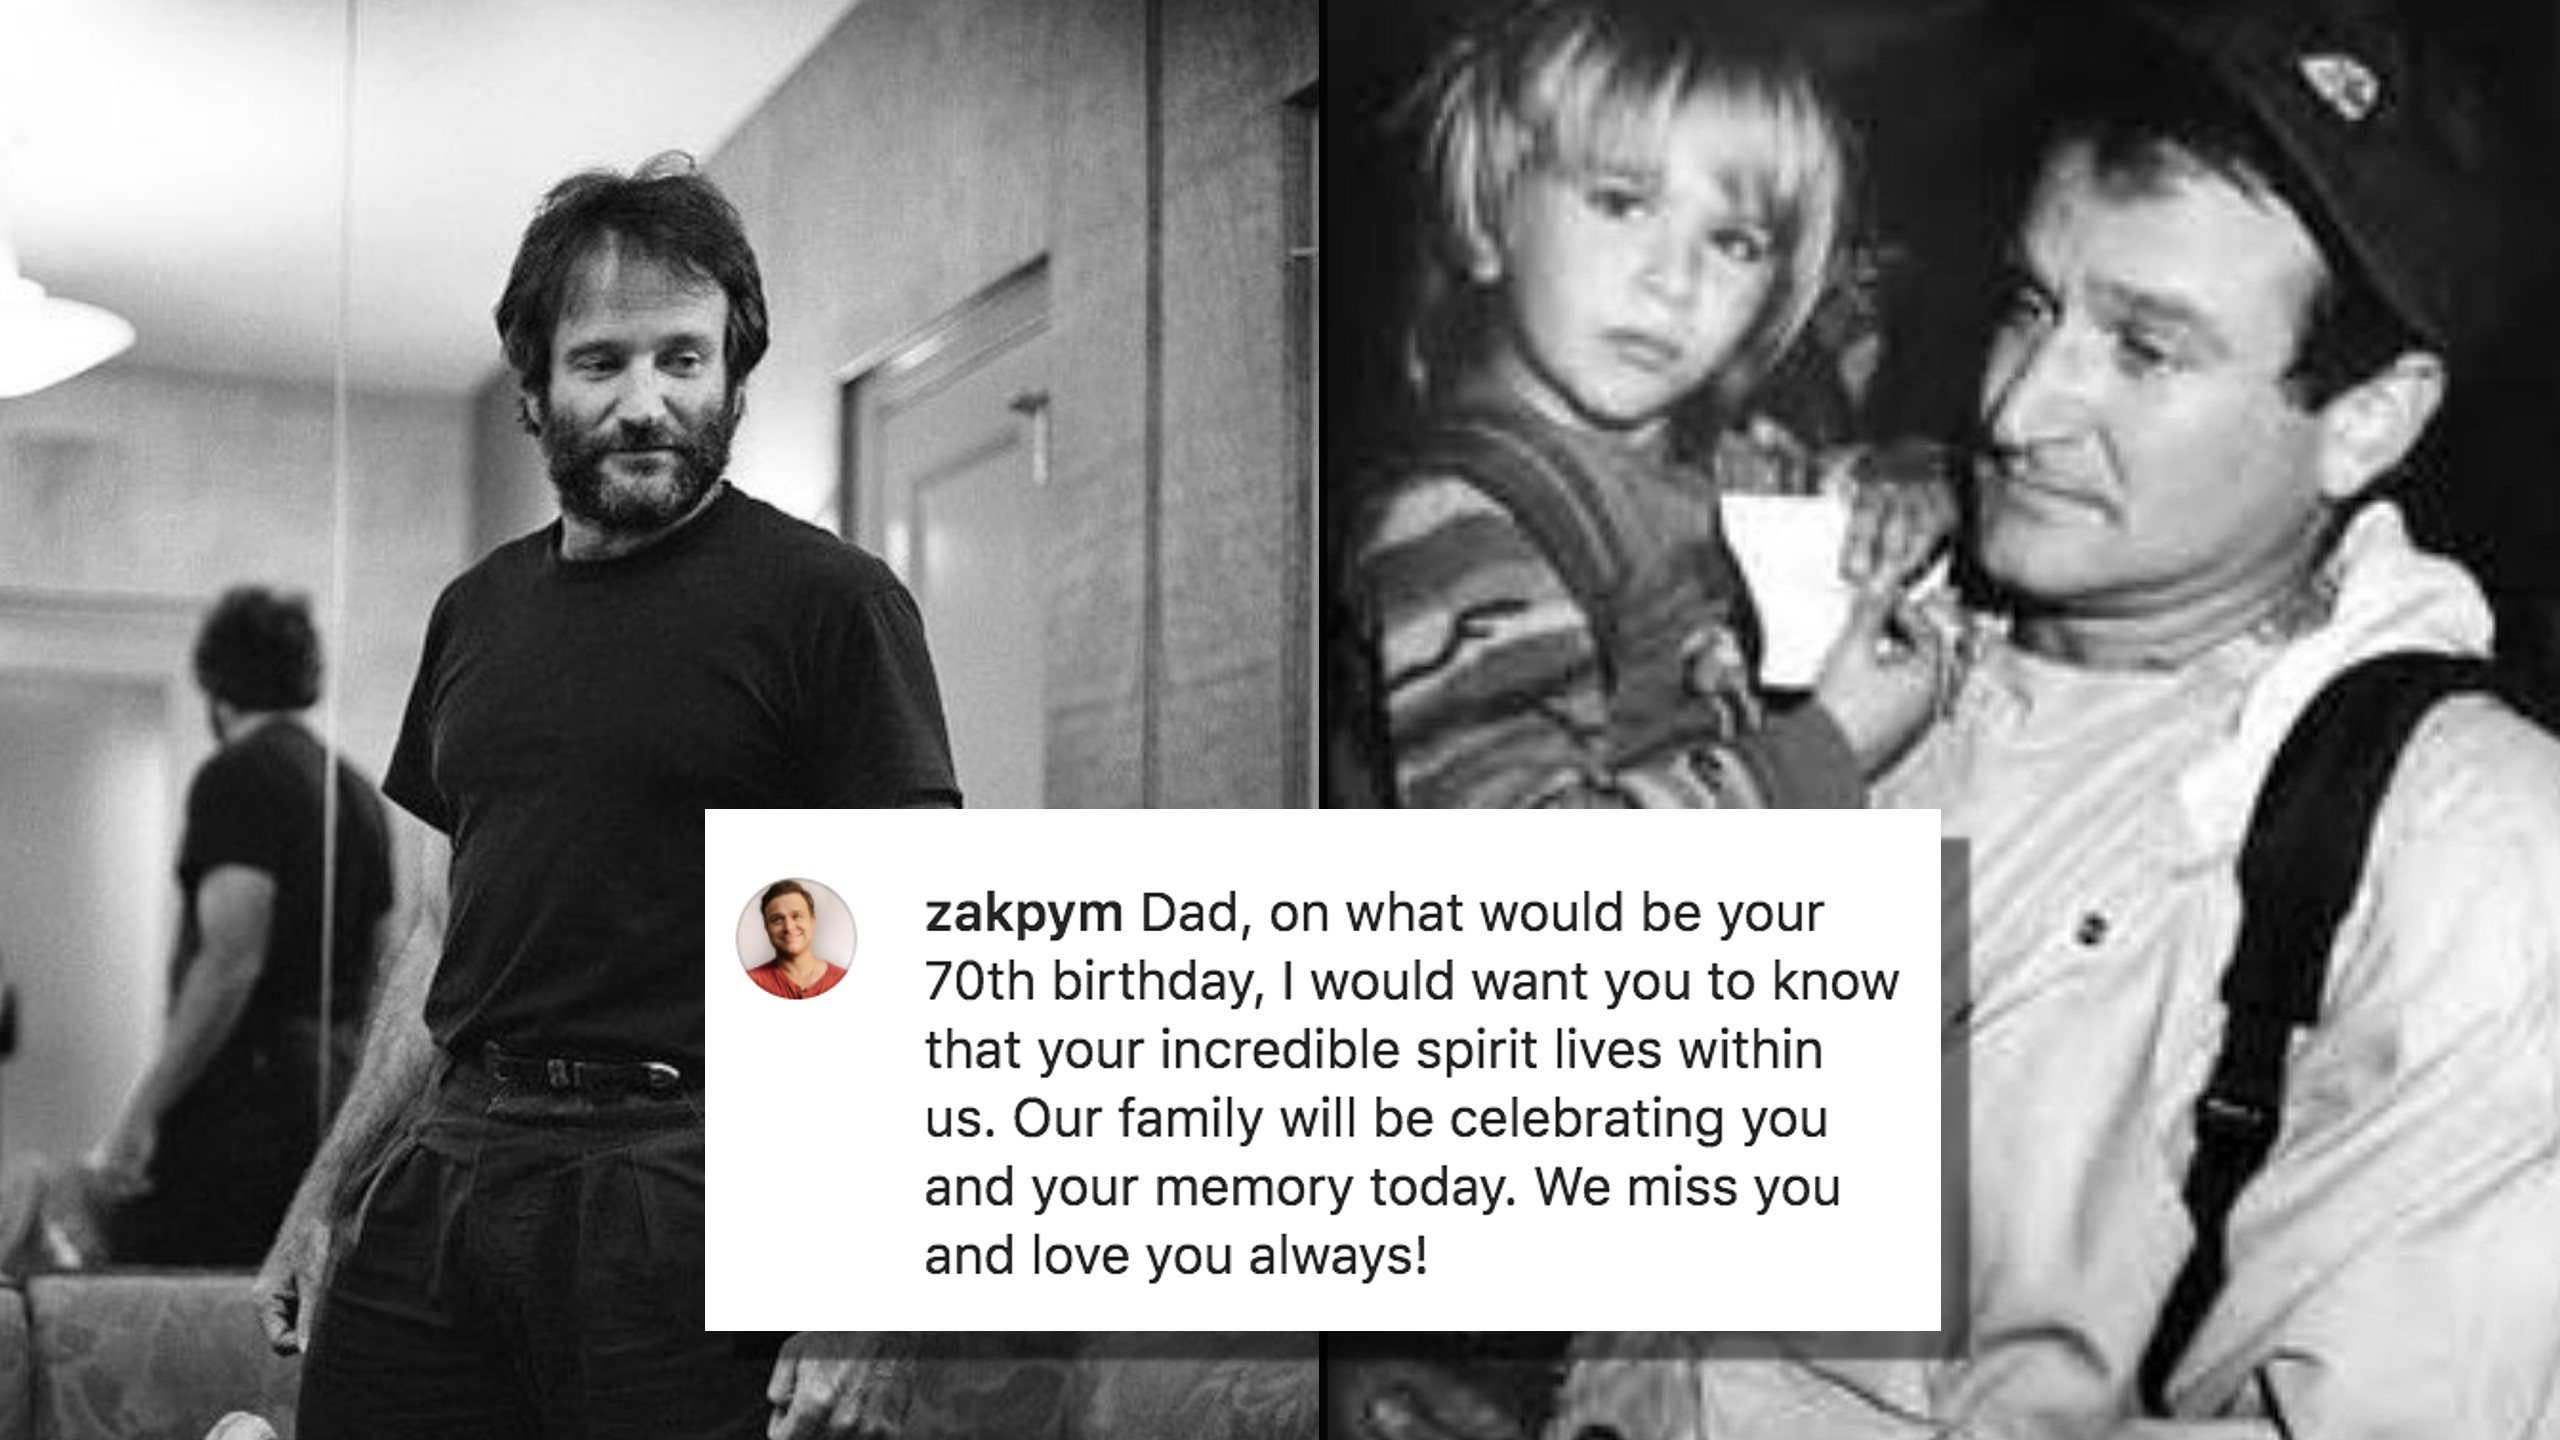 Zak Williams talks openly about his dad in honor of his 70th birthday